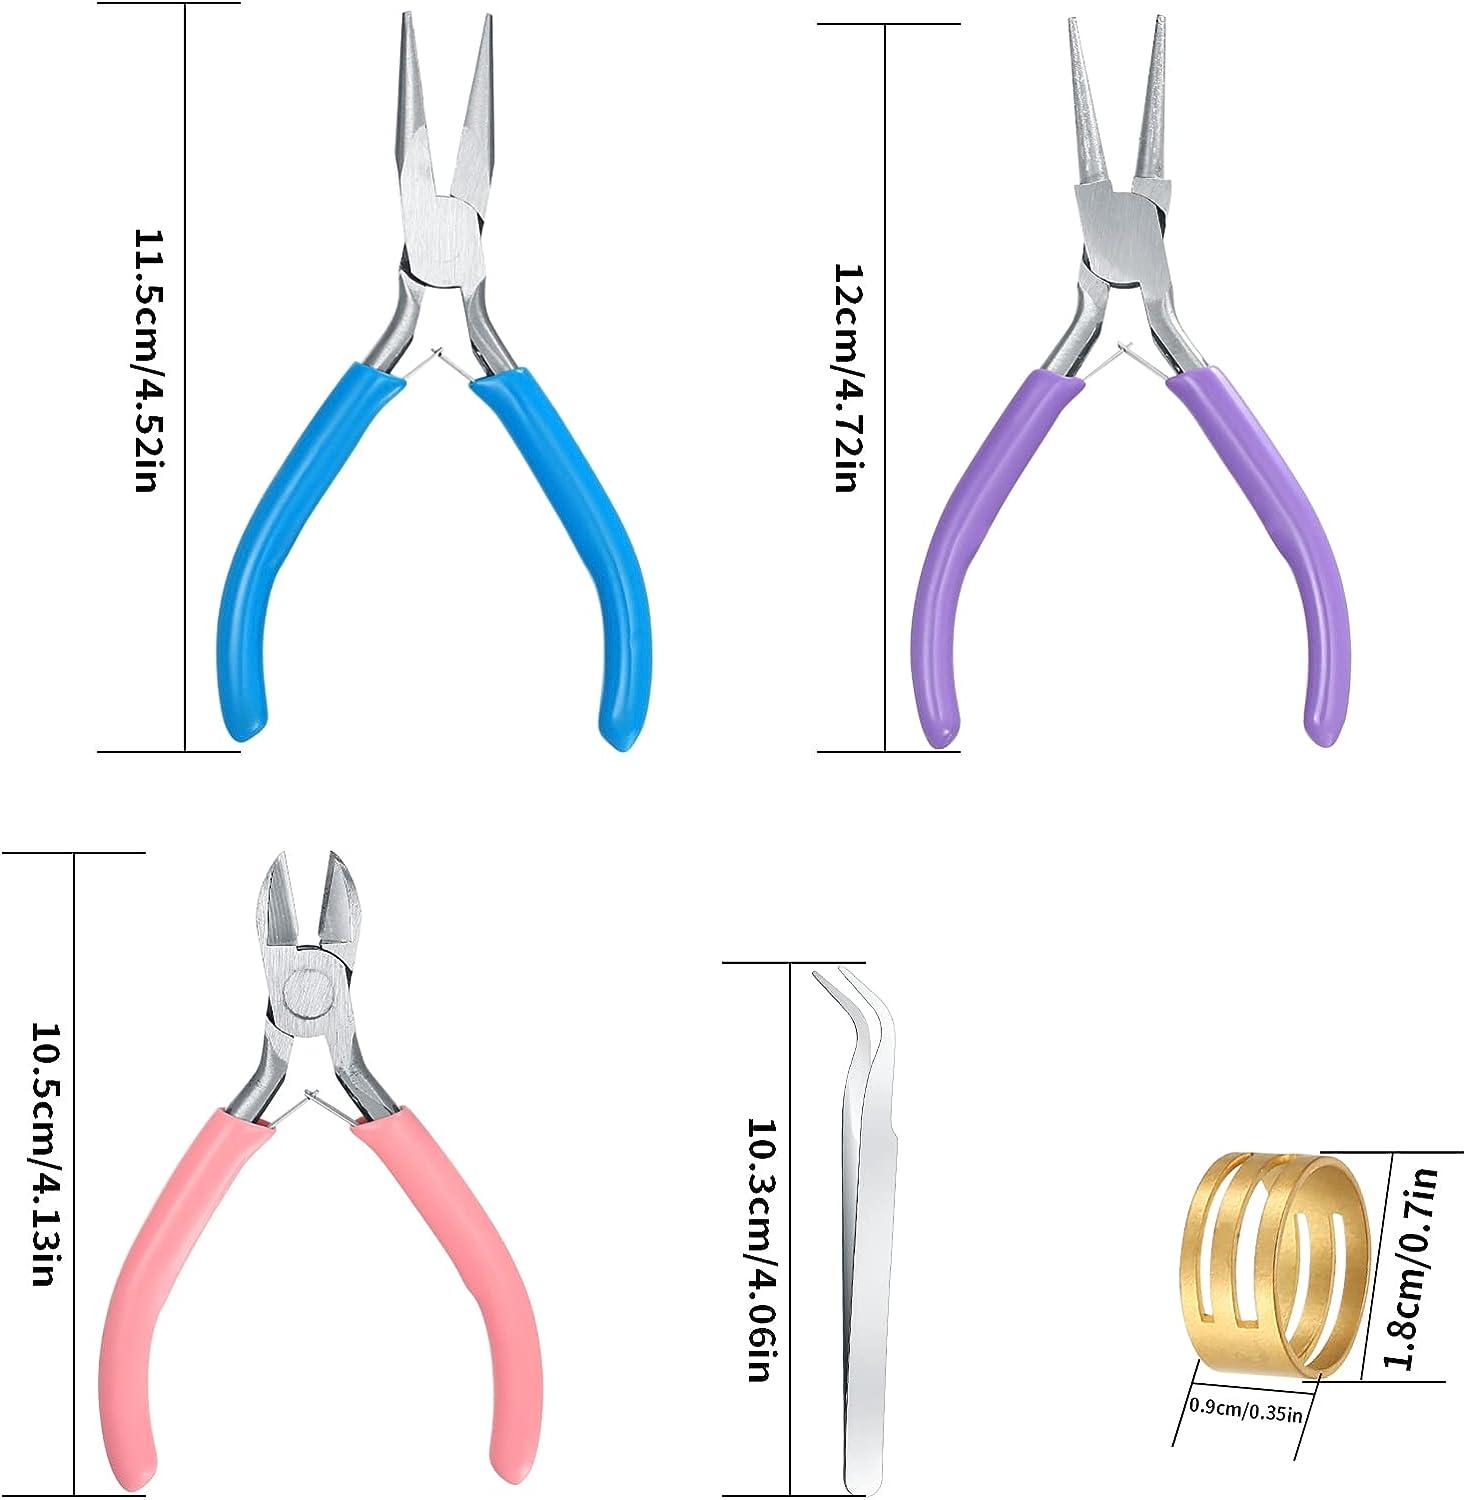 Jewelry Pliers, Jewelry Making Pliers Tools with Needle Nose Pliers/Chain  Nose Pliers, Round Nose Pliers and Wire Cutter for Jewelry Repair, Wire  Wrapping, Crafts, Jewelry Making Supplies3pcs 